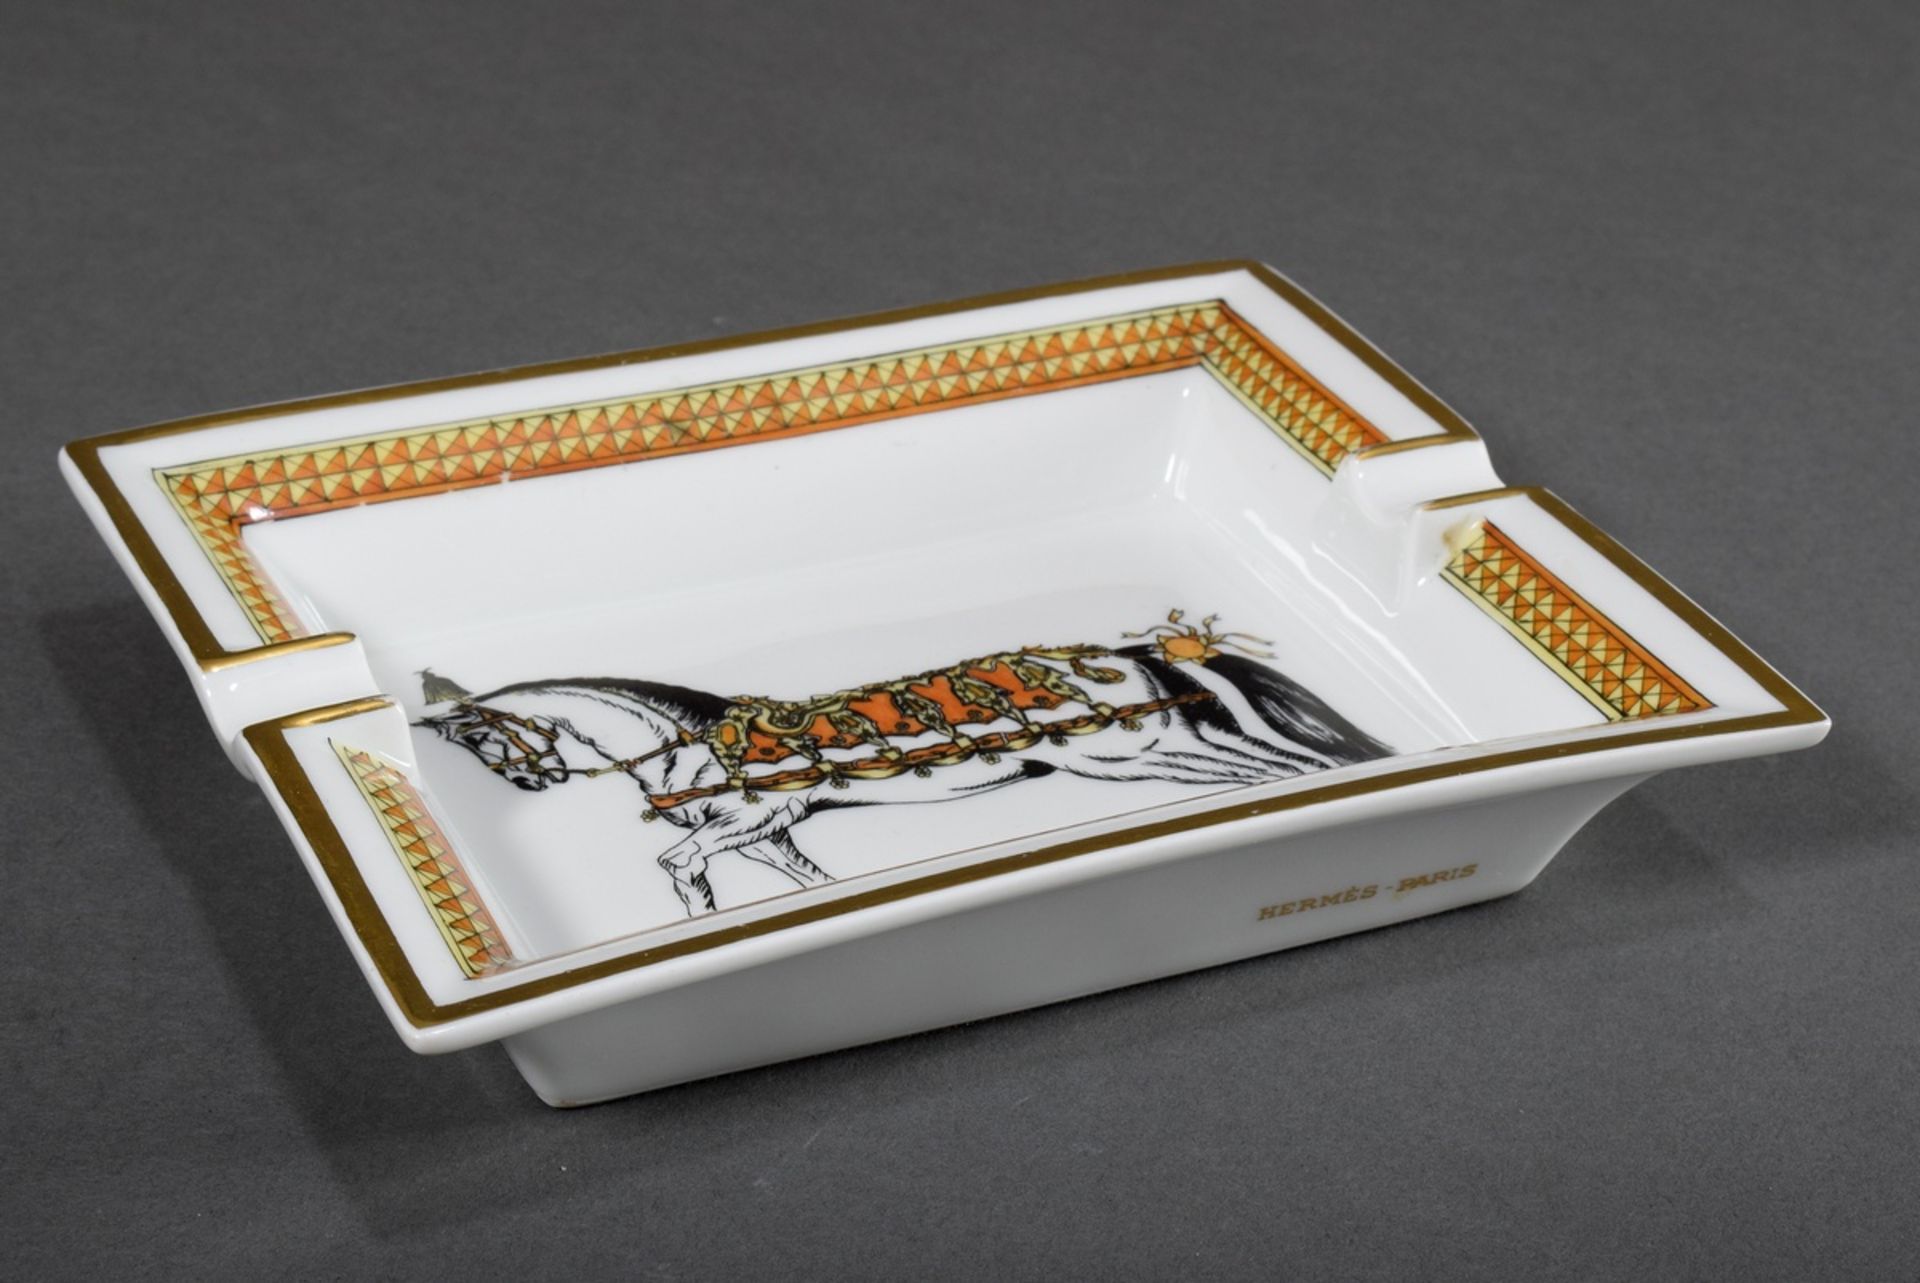 Hermès porcelain ashtray with overprint decoration "Parade horse" and hand colored rim, 1990s, 4x19 - Image 2 of 5